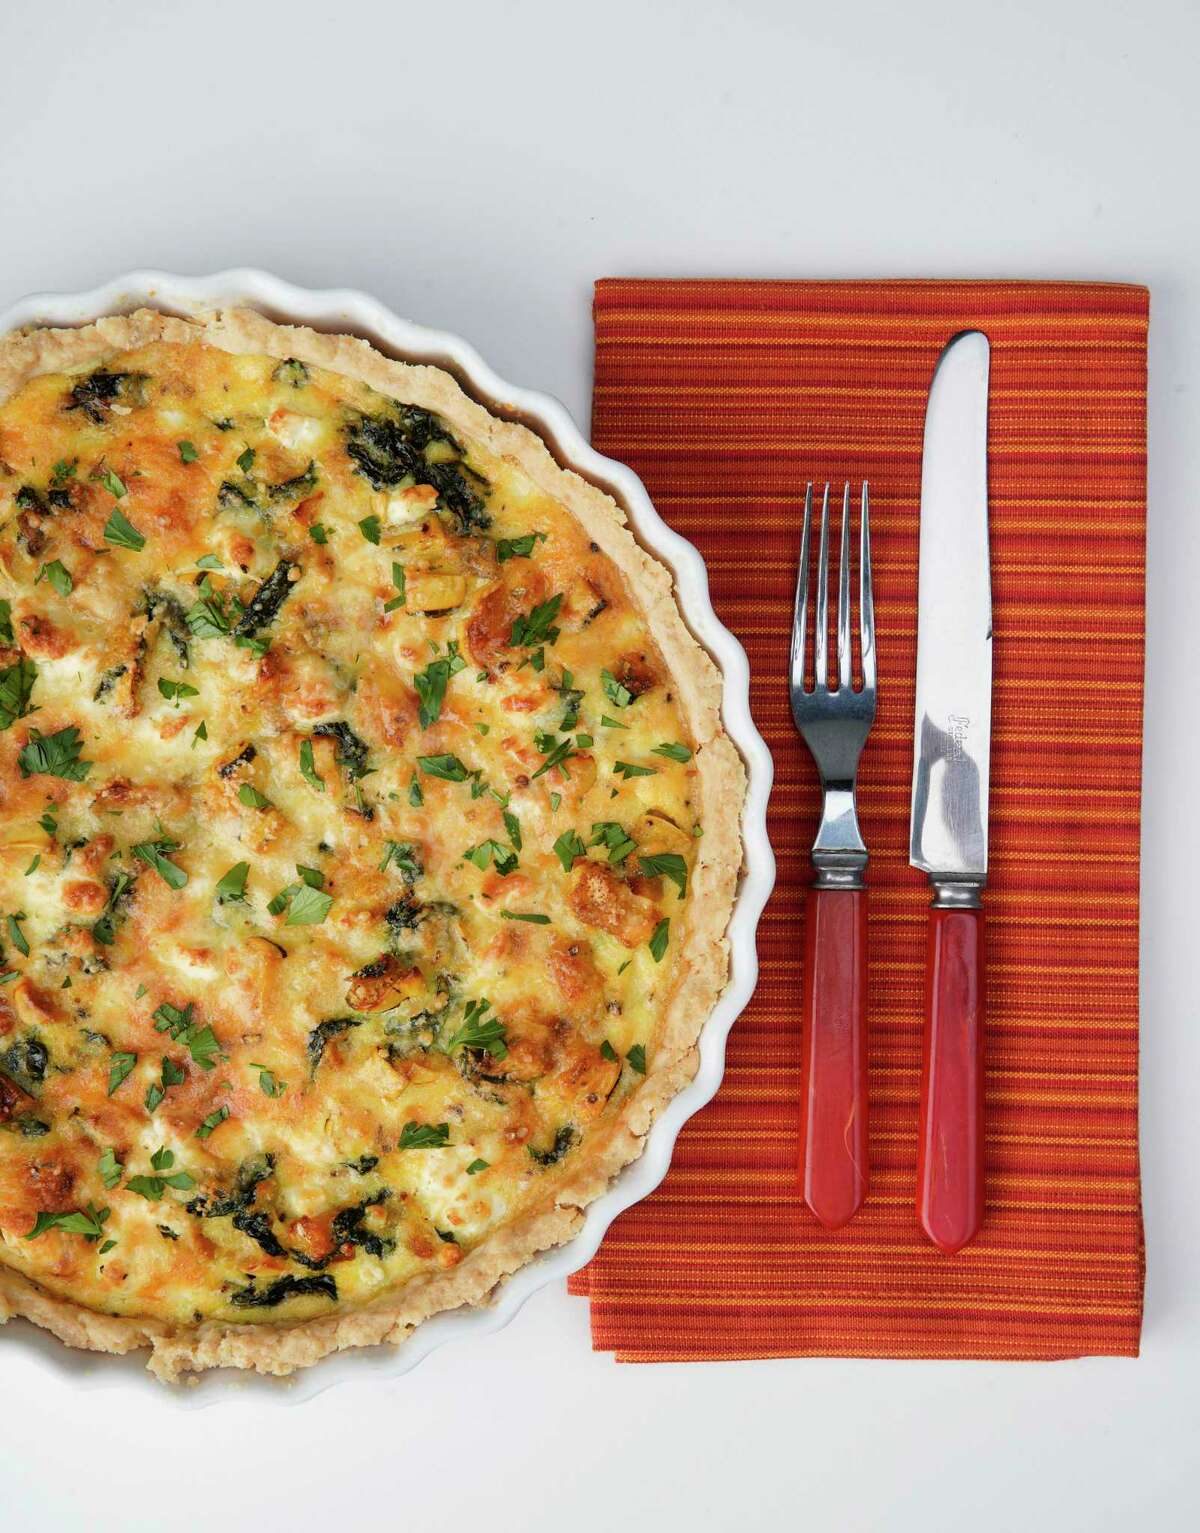 Spinach and roasted squash play starring roles in this simple quich that can be made with supermarket pie dough.